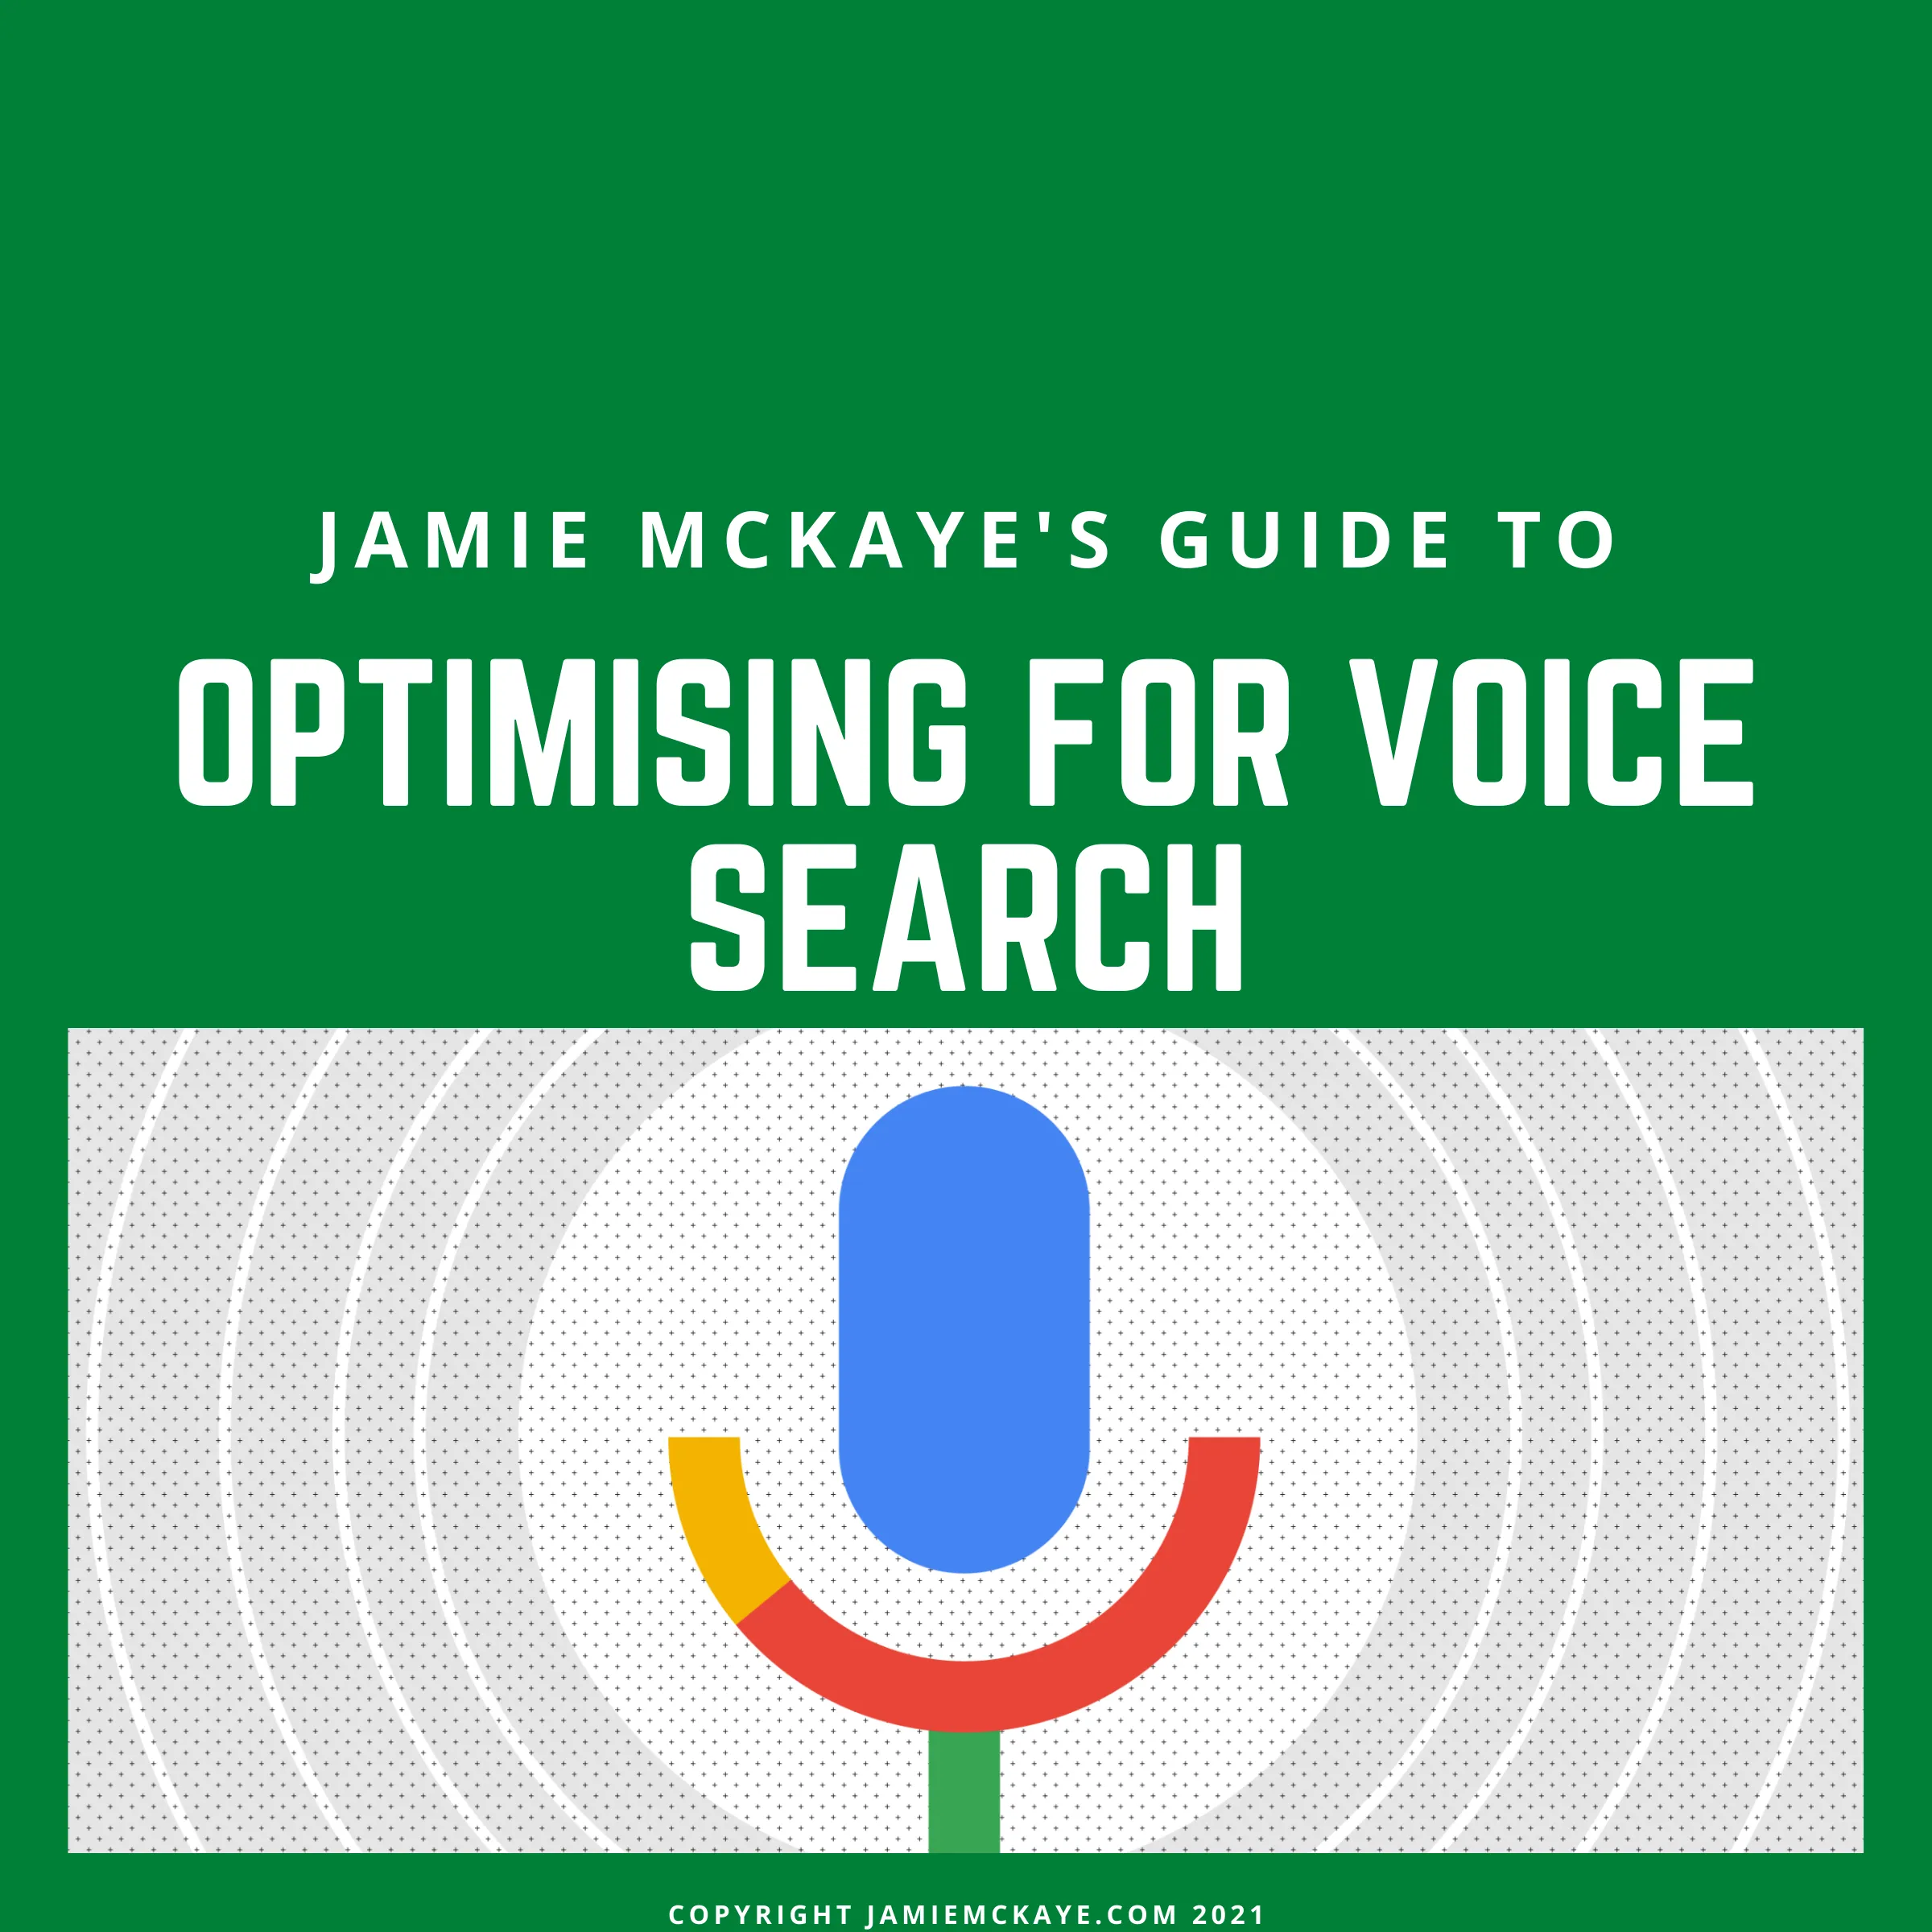 How to optimise for Voice Search